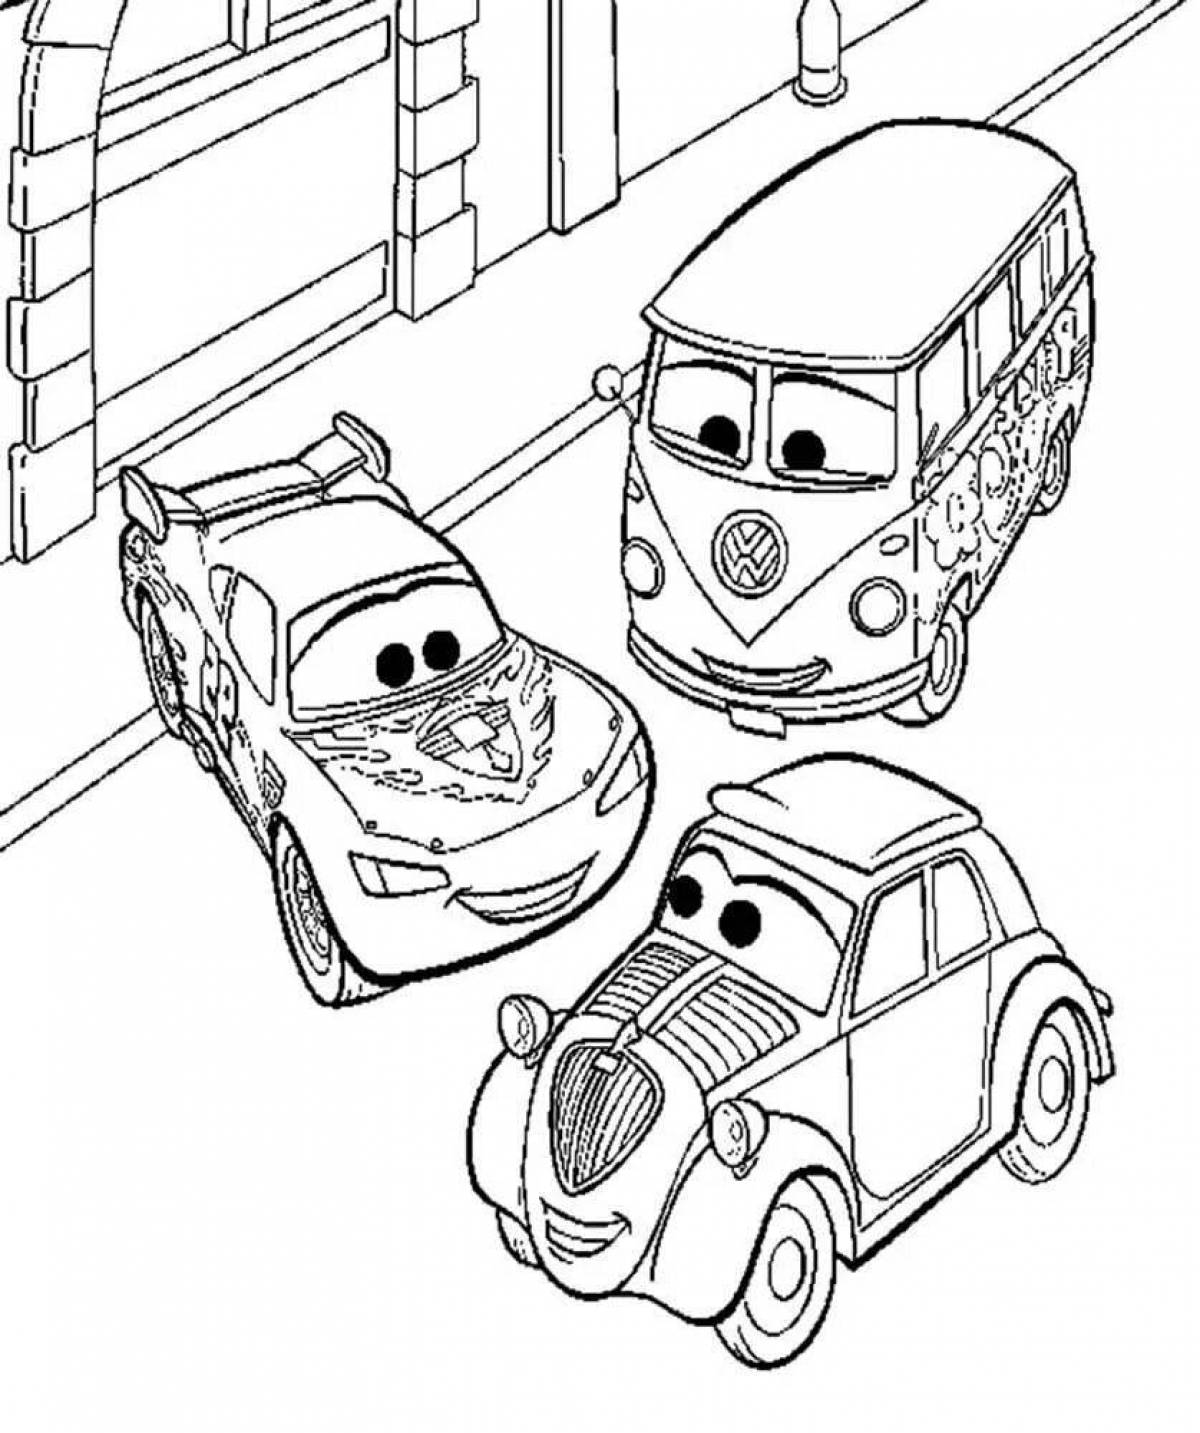 Coloring quirky cartoon cars